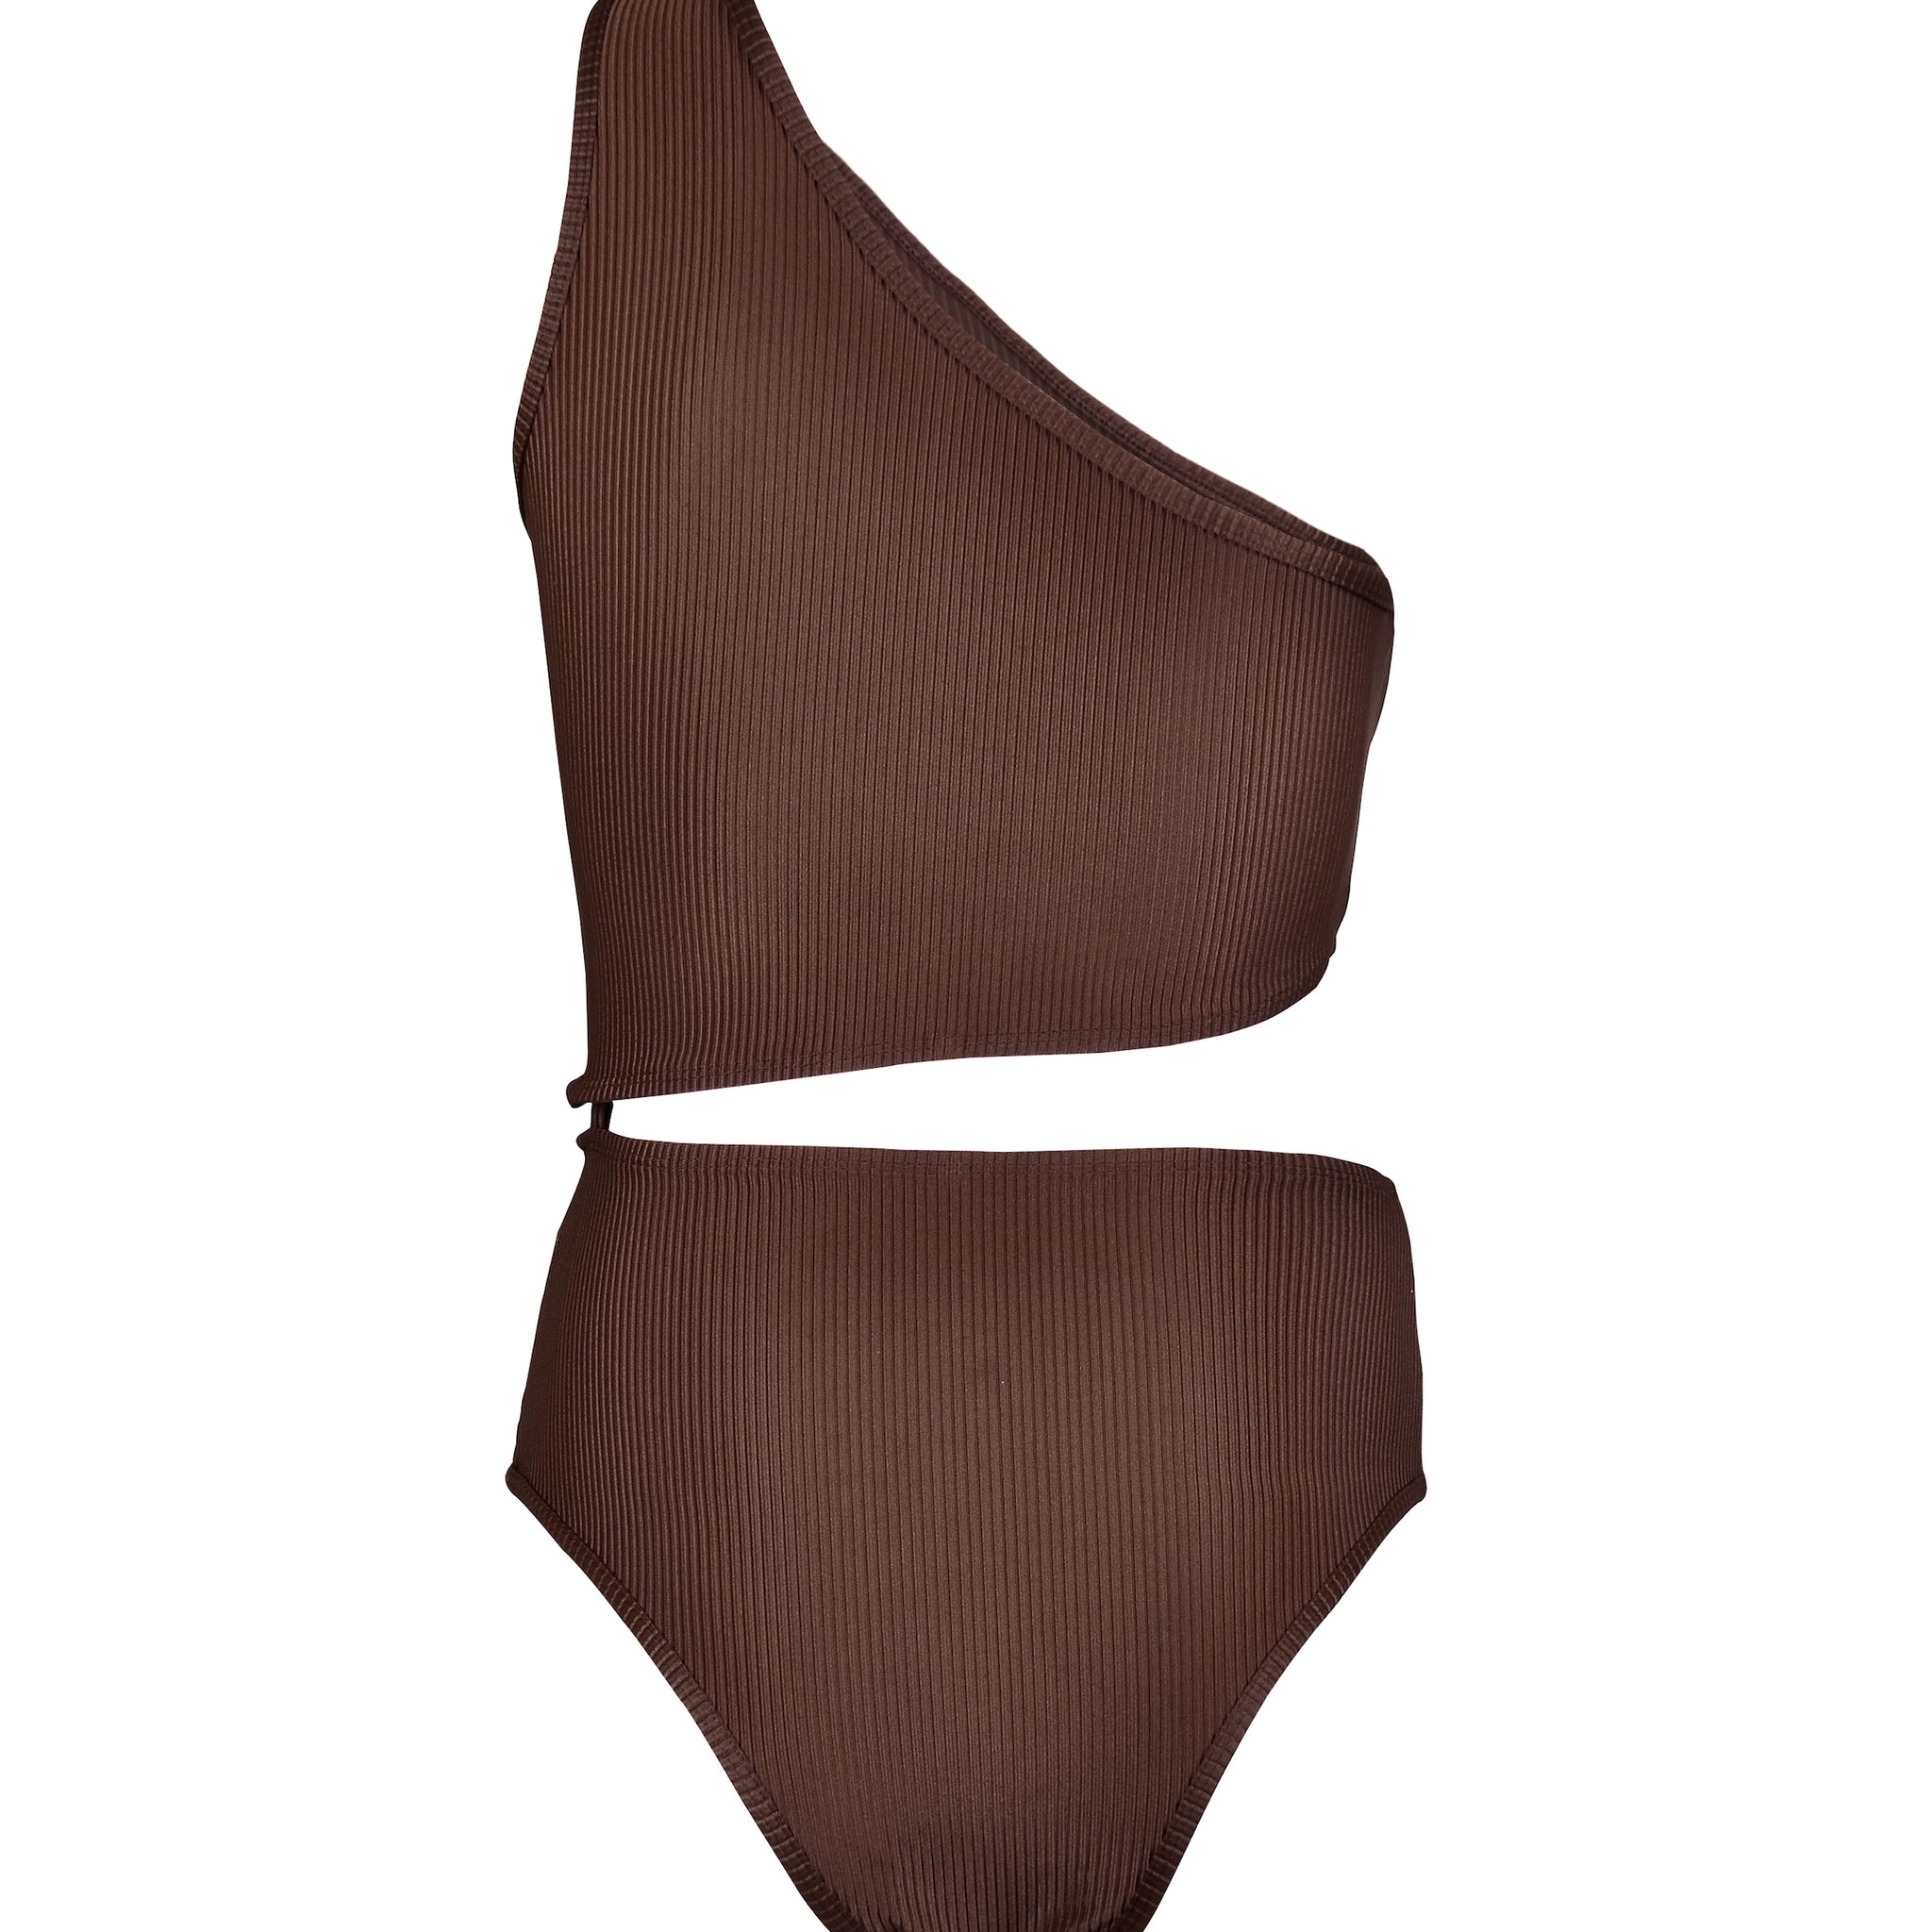 AYLA SWIMSUIT (CHOCO) - Swimwear THIS IS A LOVE SONG